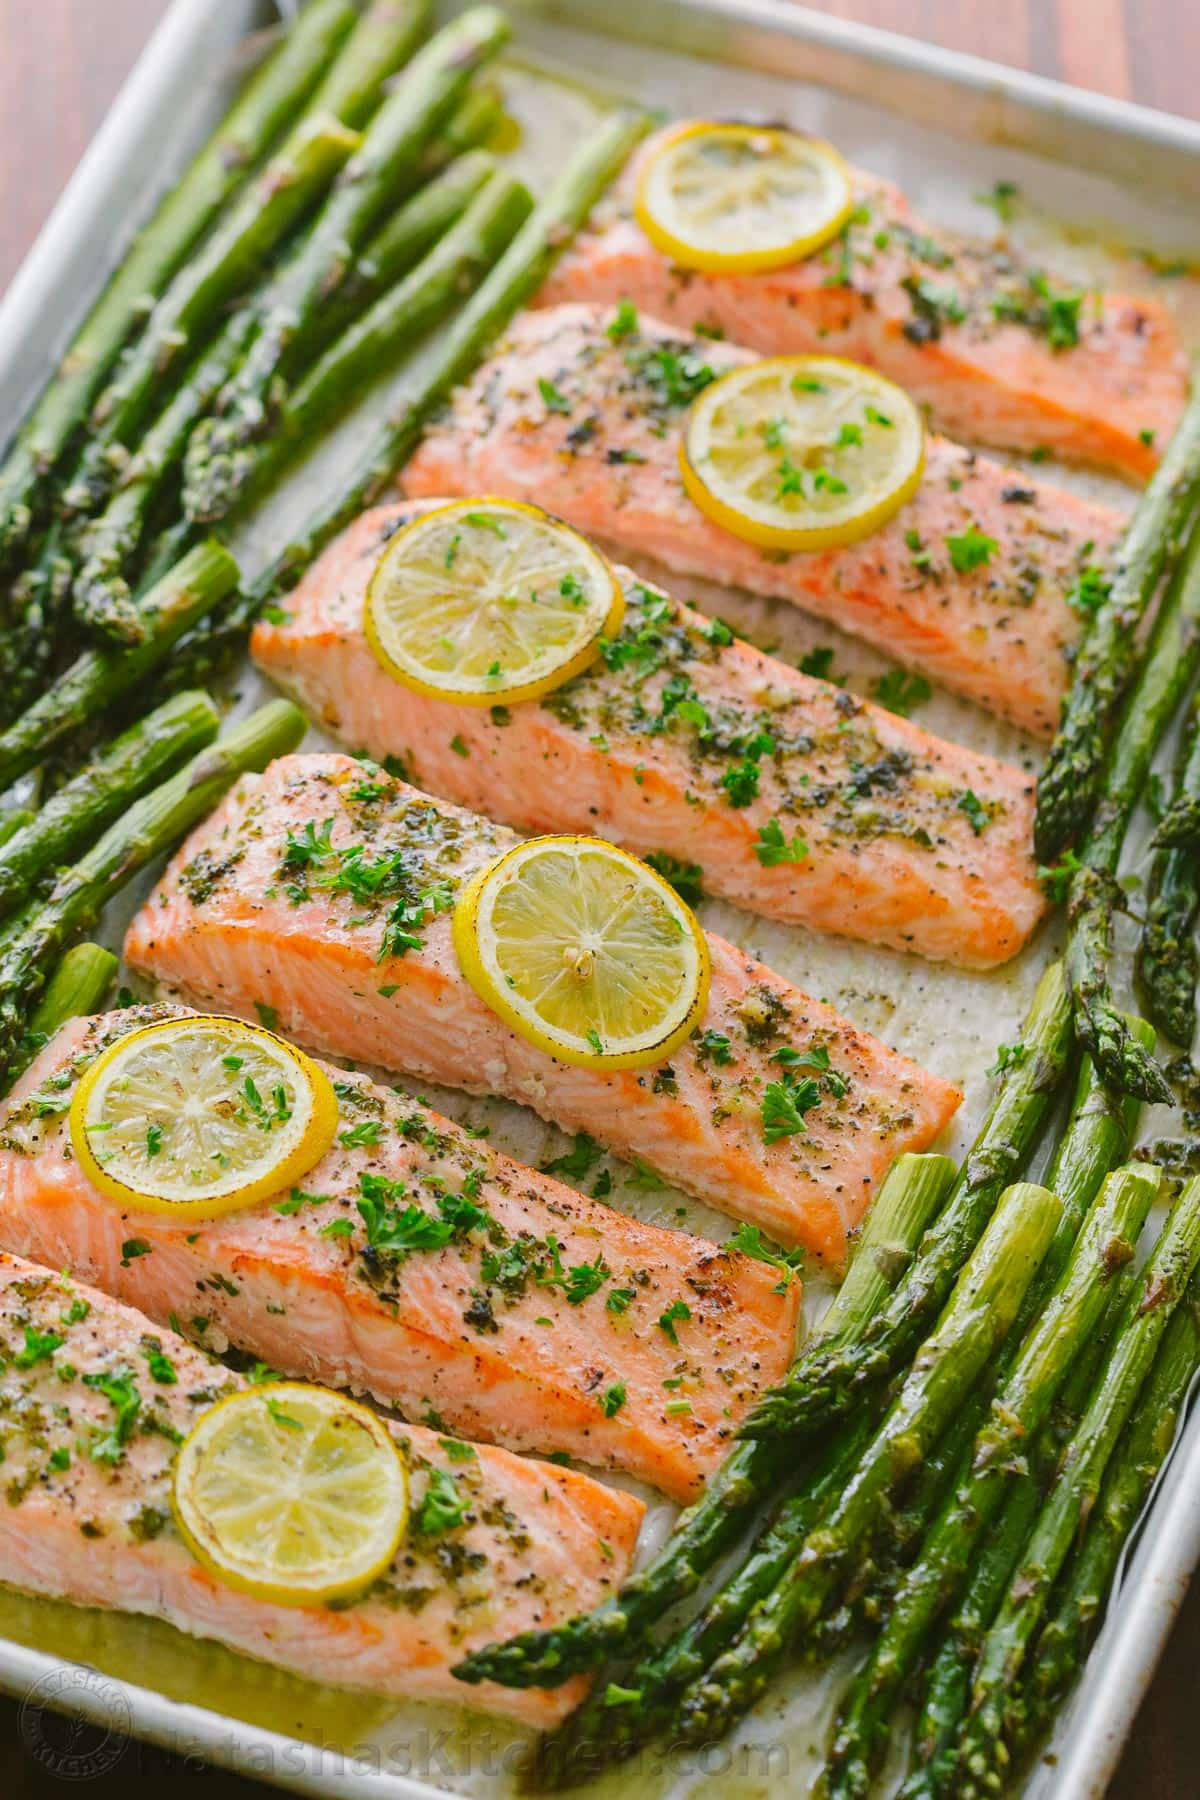 Baking Salmon and asparagus Lovely Recipe Yummy Baked Salmon with asparagus Easy Food